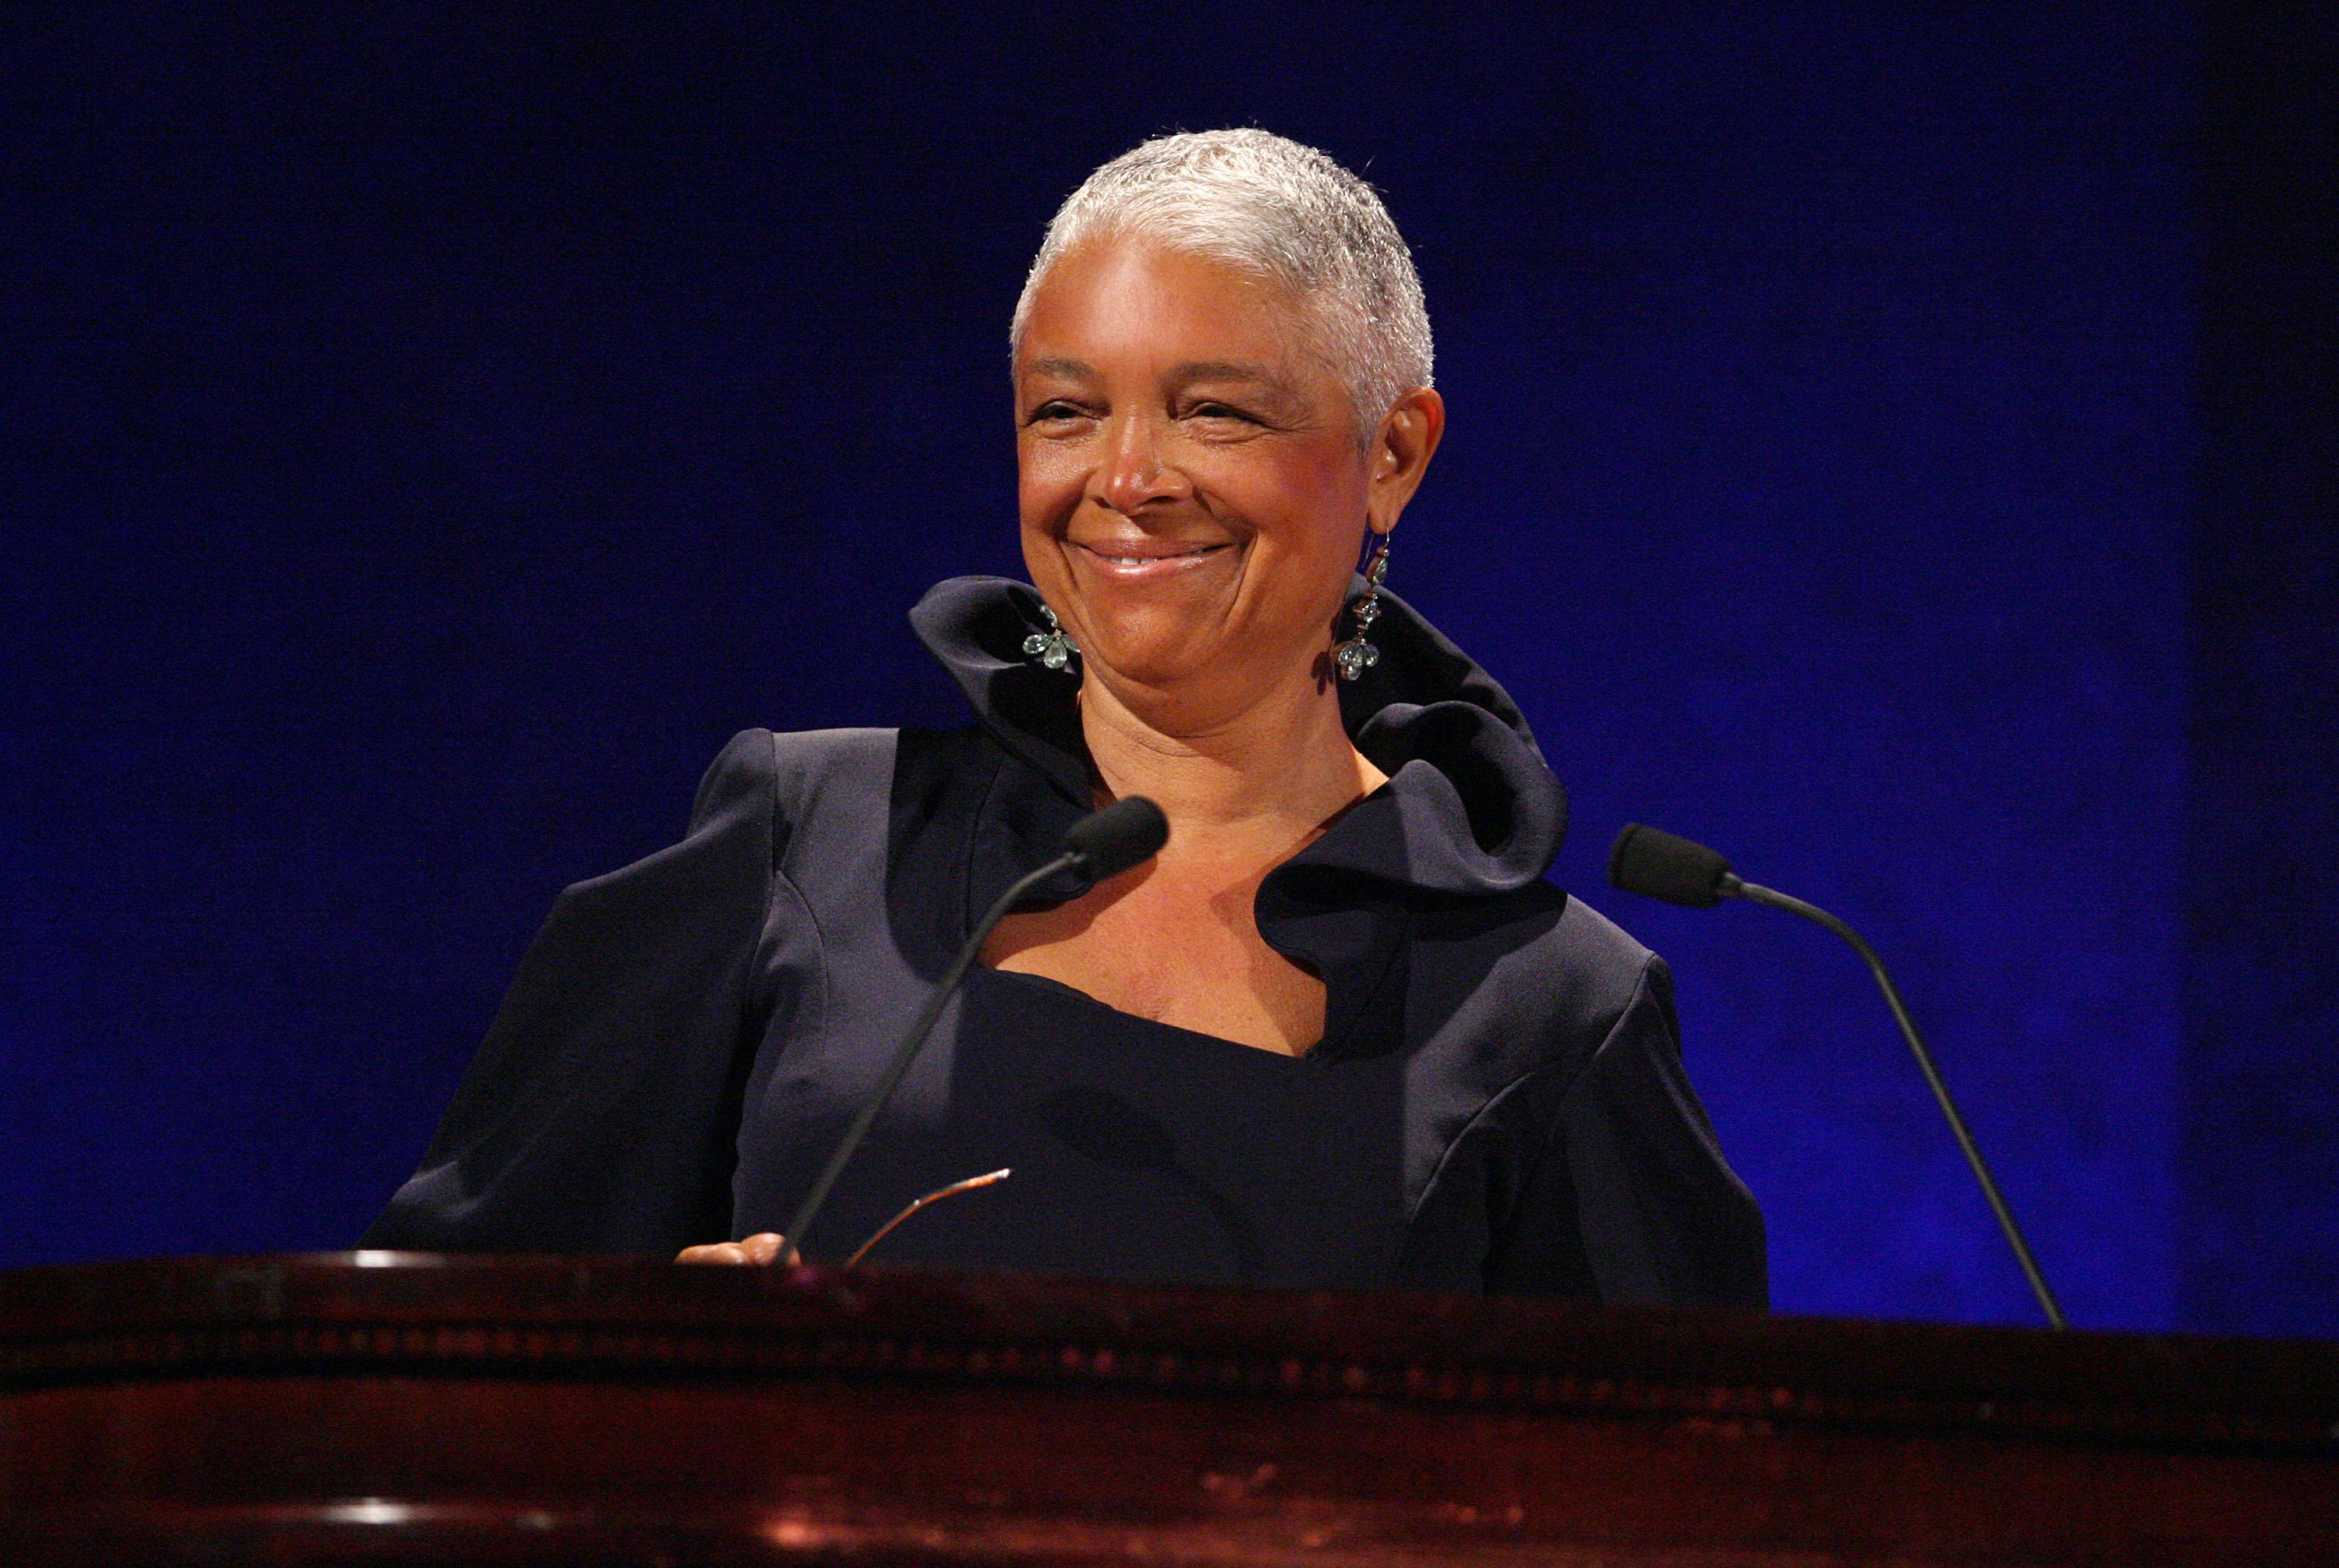 Dr. Camille Cosby speaks on stage at the 35th Anniversary of the Jackie Robinson Foundation on March 3, 2008. | Photo: GettyImages 